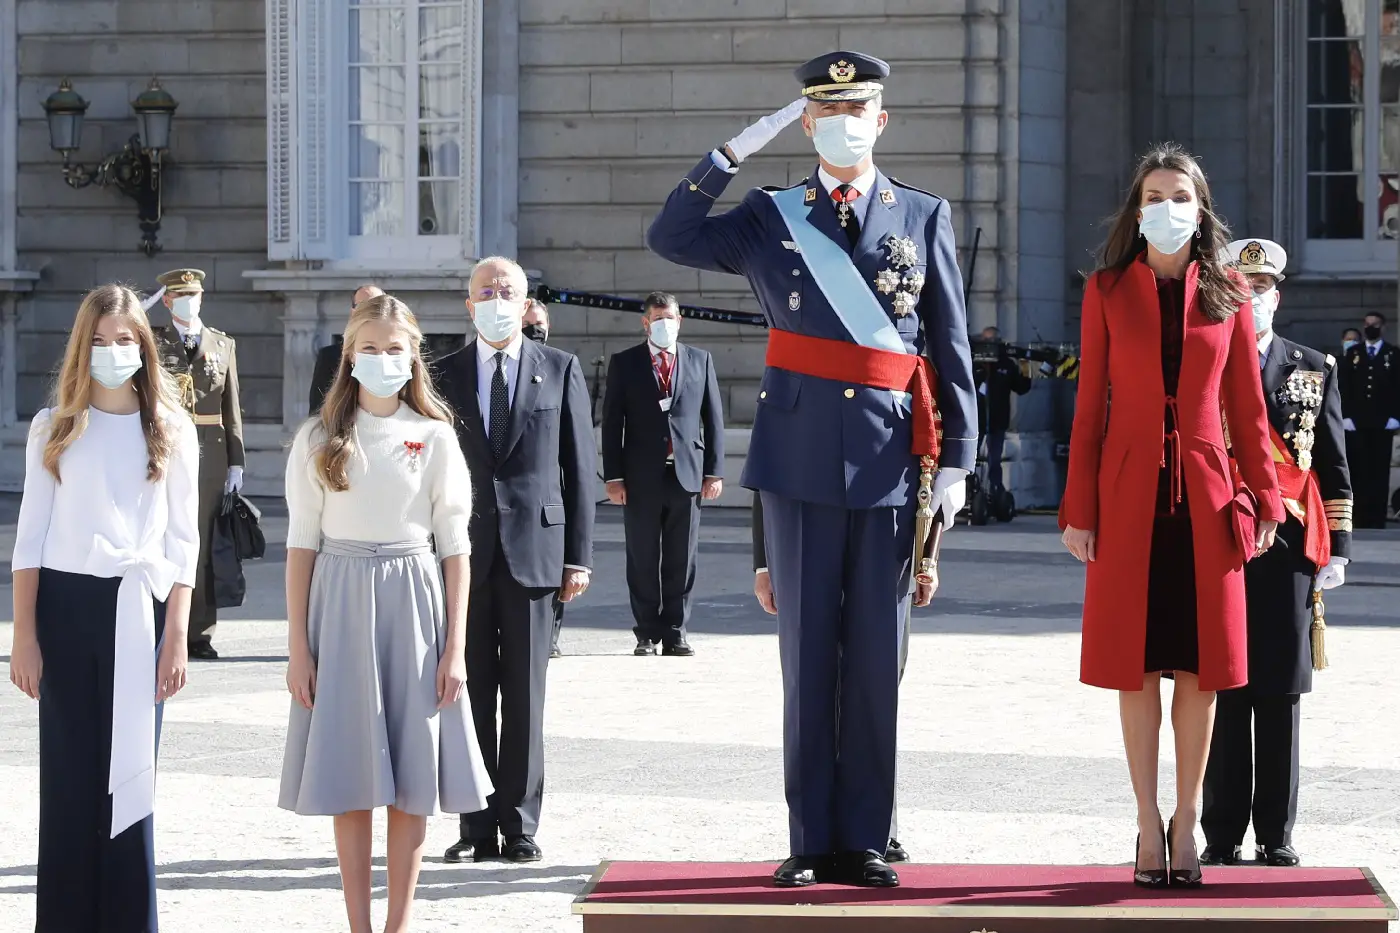 King Felipe and Queen Letizia of Spain attendded the National day event